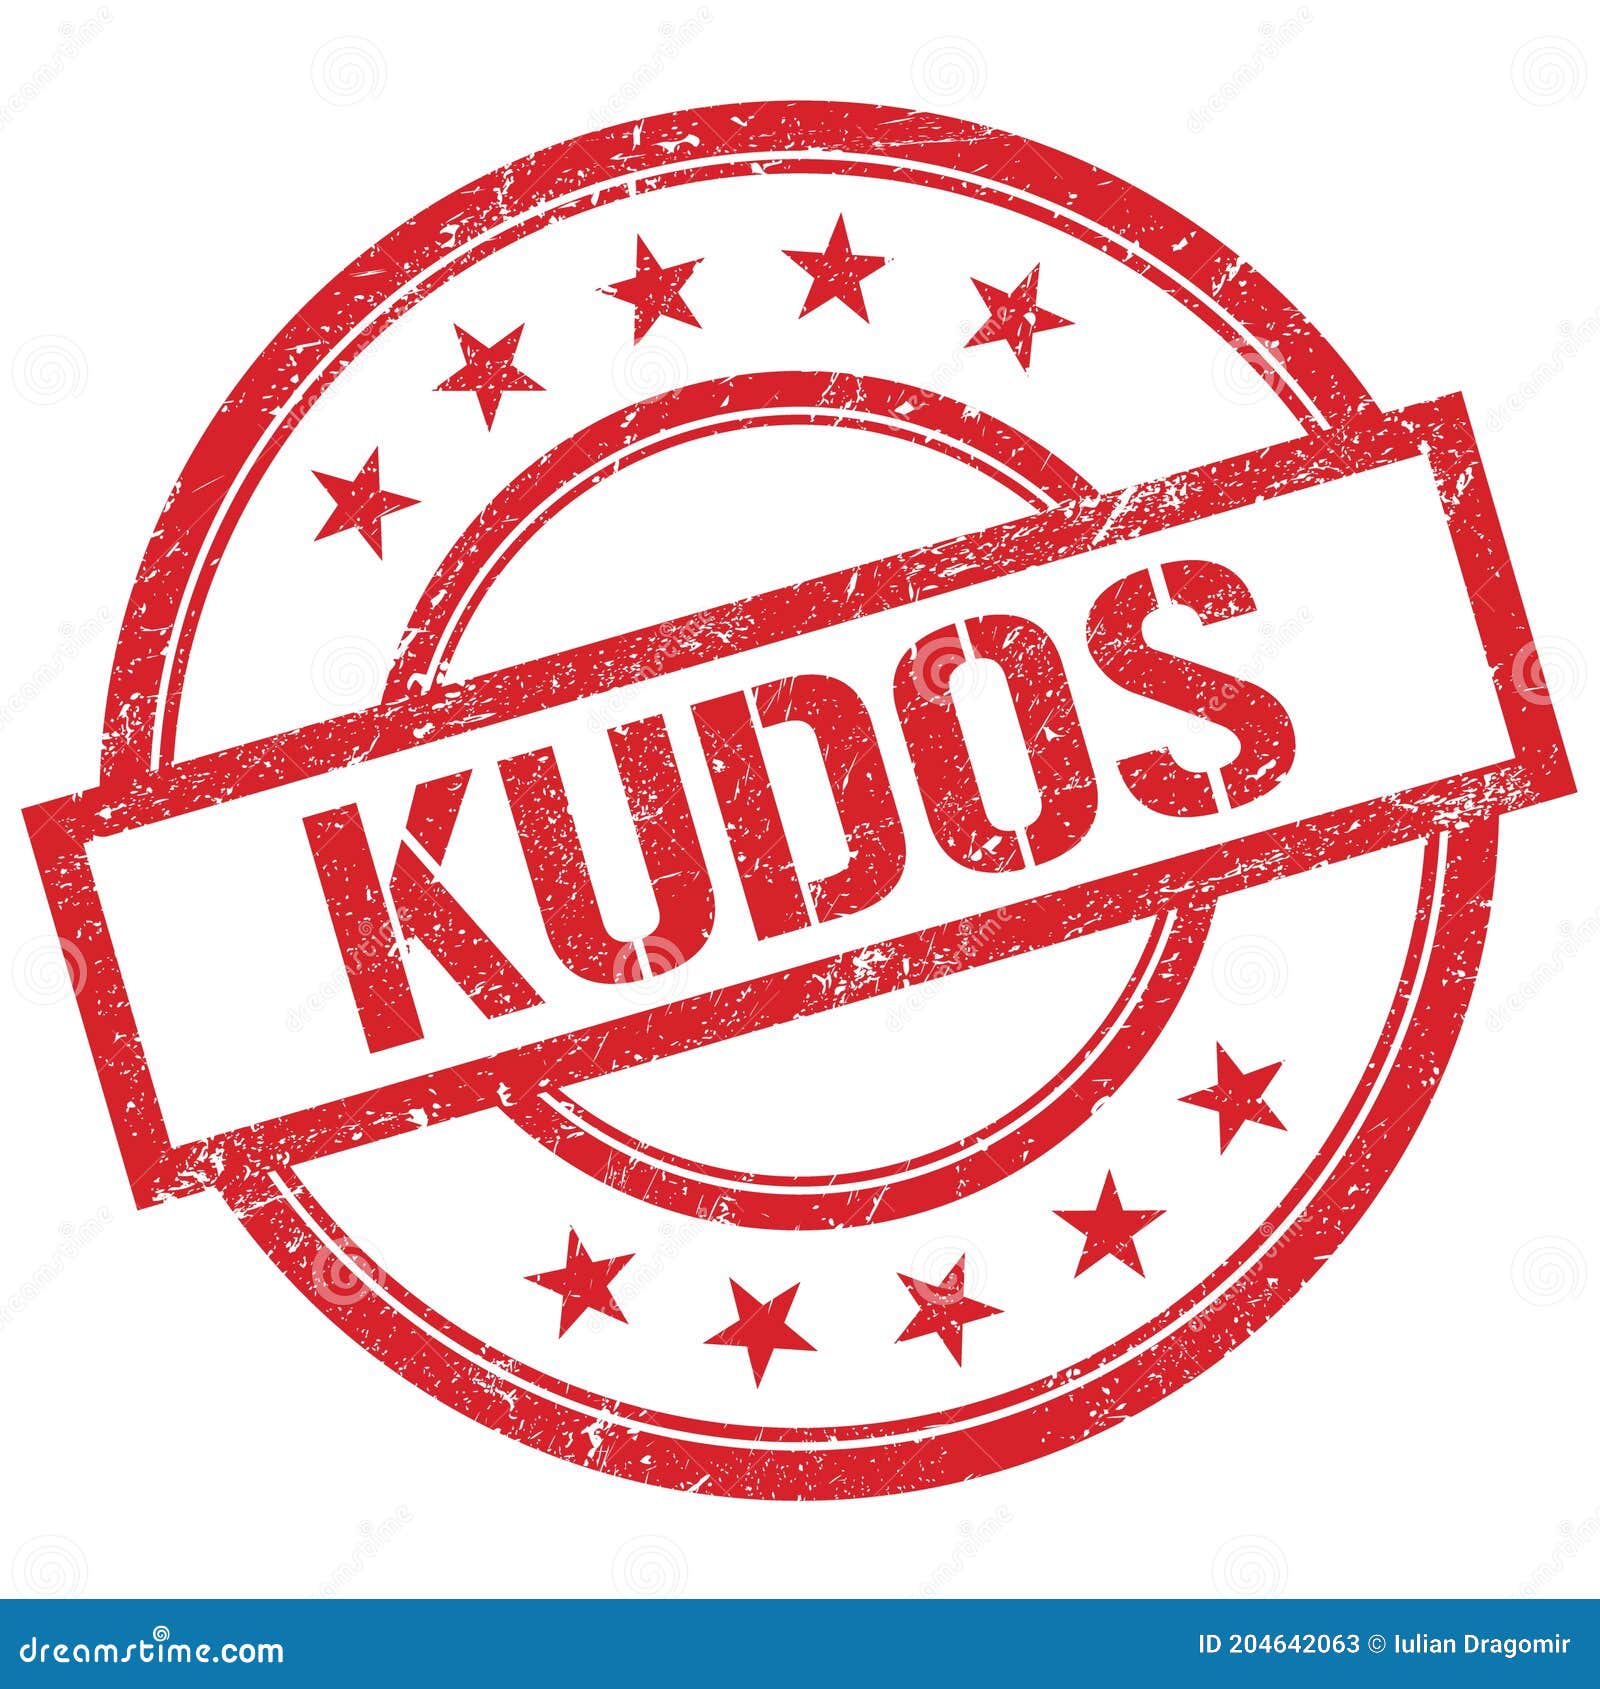 kudos-cartoons-illustrations-vector-stock-images-325-pictures-to-download-from